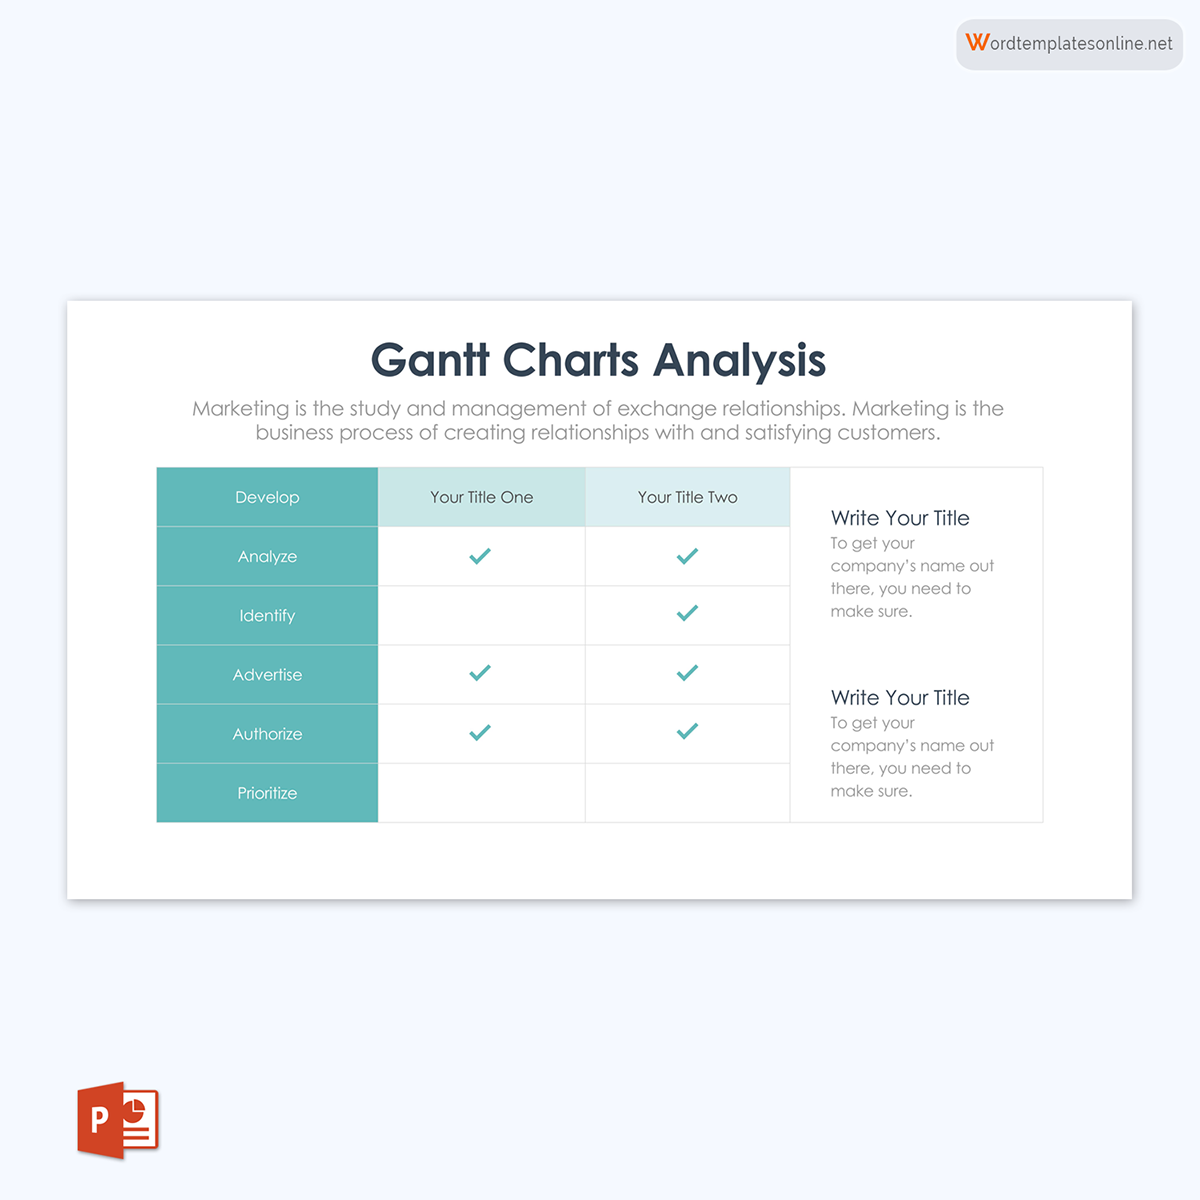 Professional Editable Title Based Gantt Chart Analysis Template 06 as PowerPoint Slides